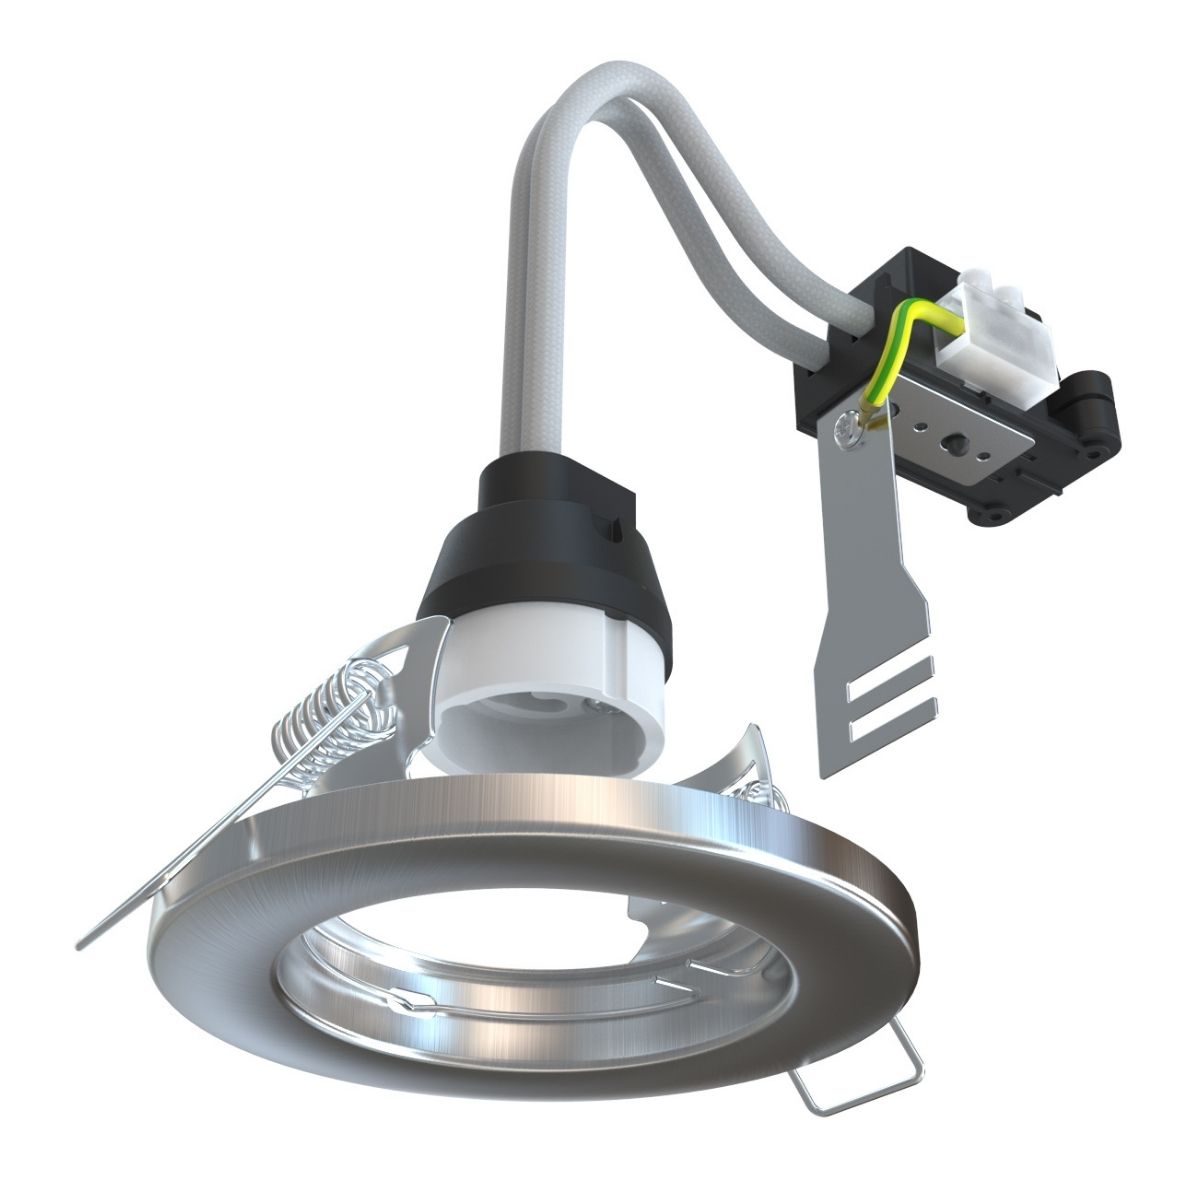 View Recessed GU10 Downlight Brushed Chrome Finish information